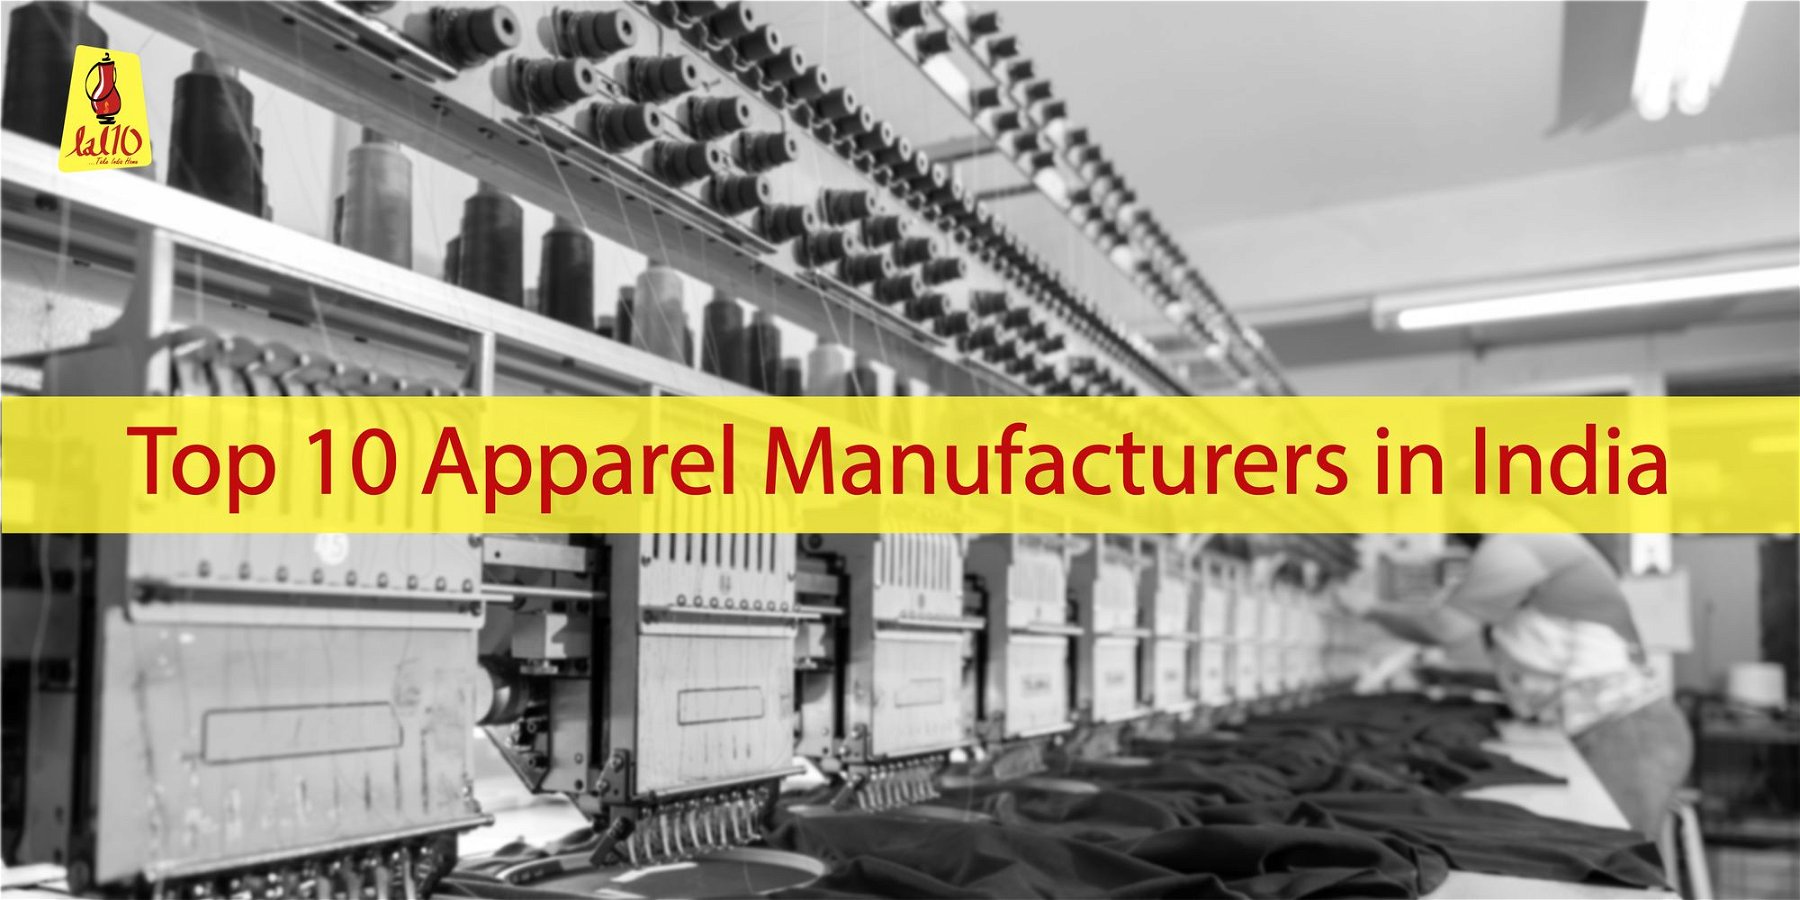 Top 10 Apparel Manufacturers In India